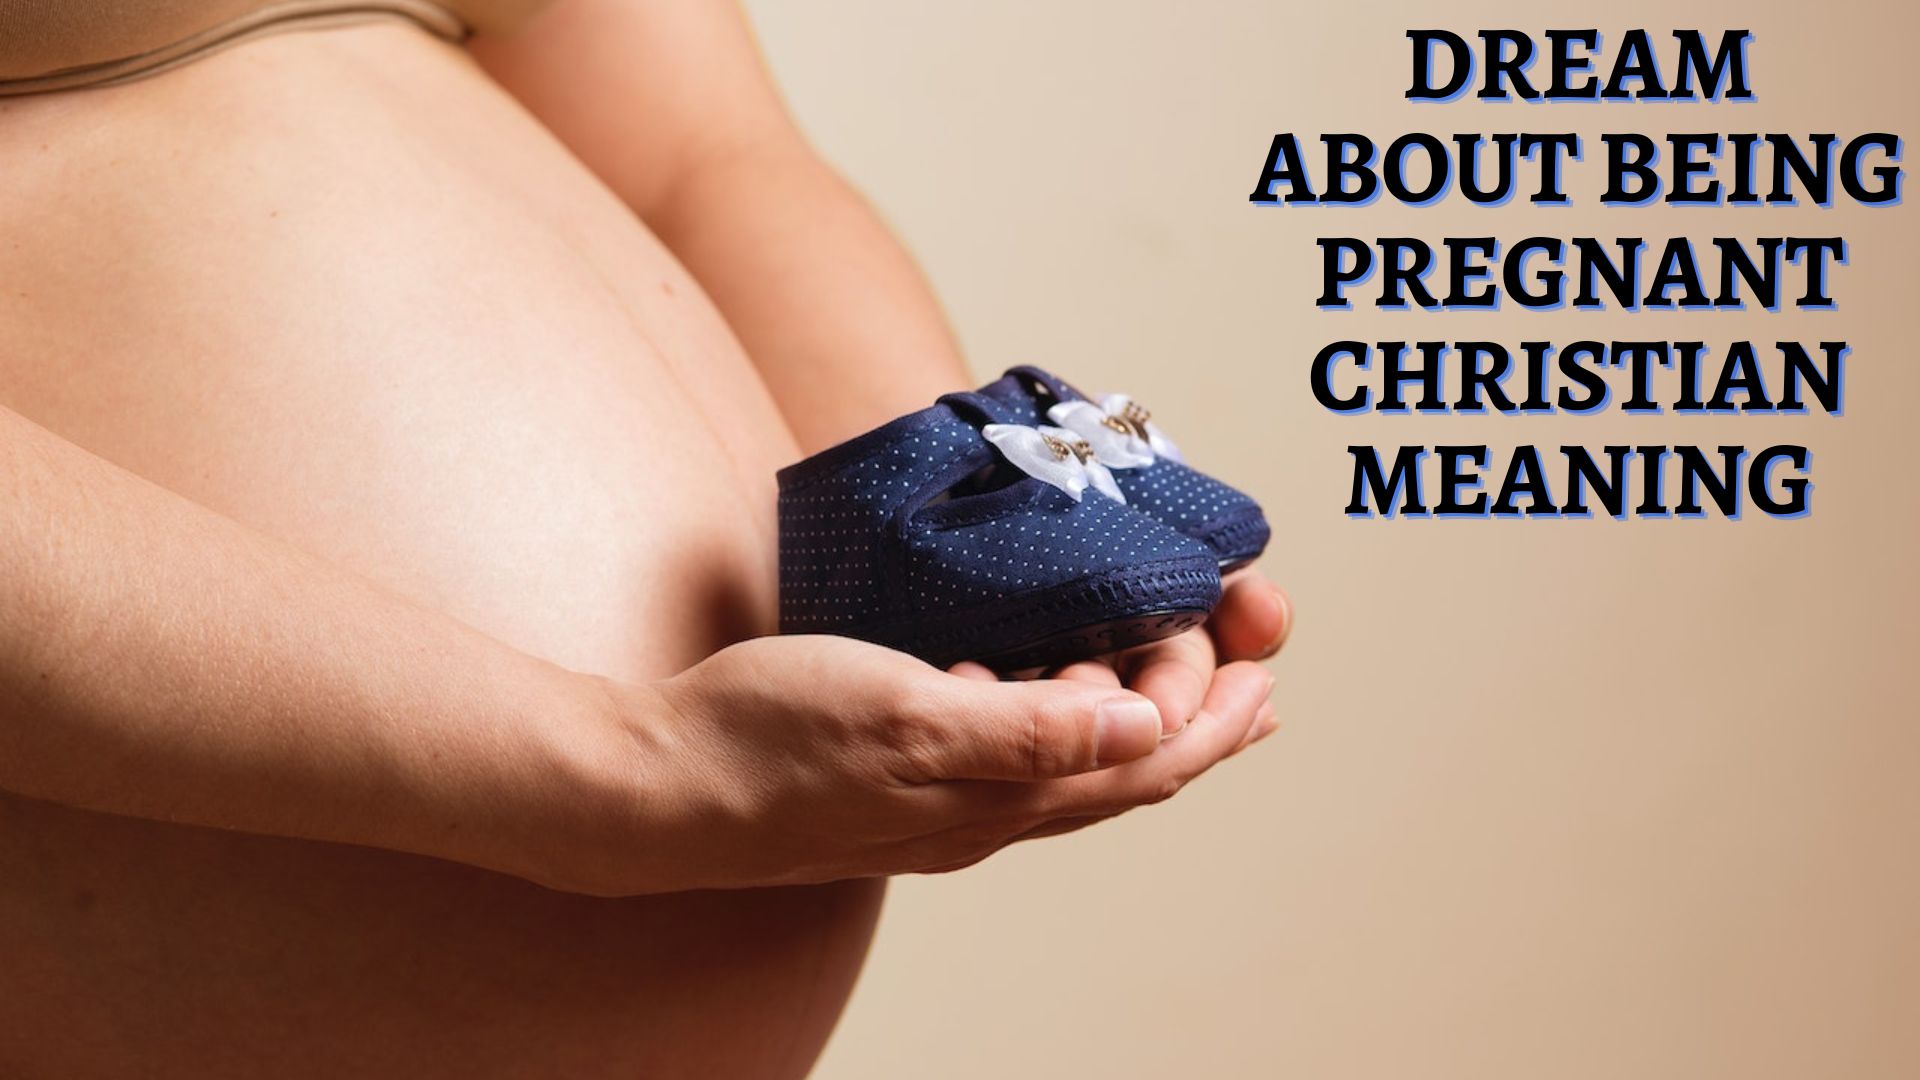 Dream About Being Pregnant Christian Meaning - A Sign Of The Love Of God